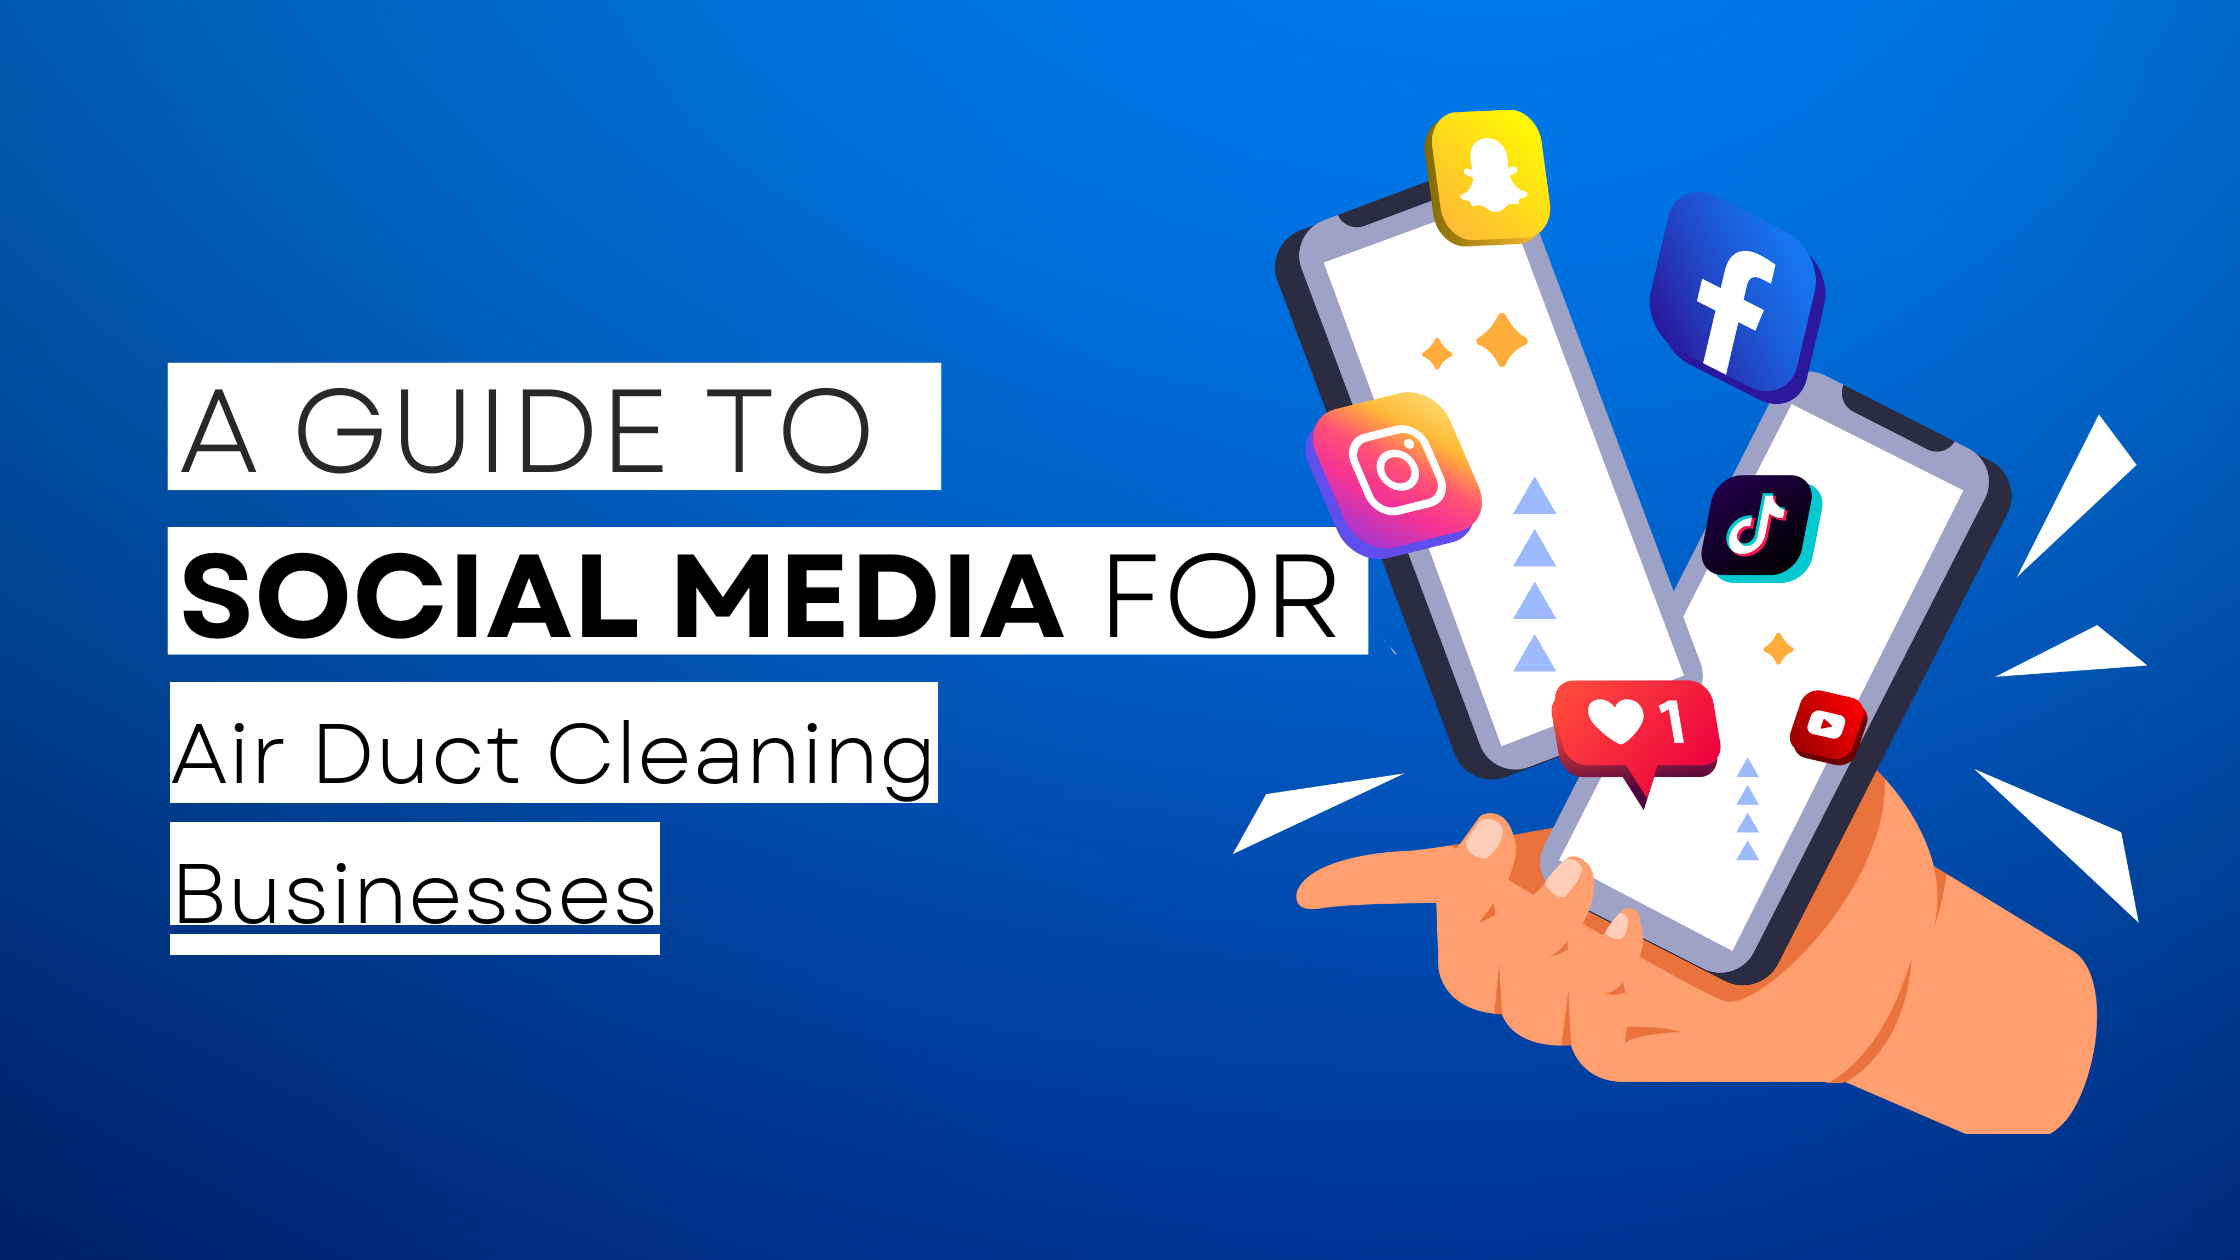 How to start Air Duct Cleaning  on social media